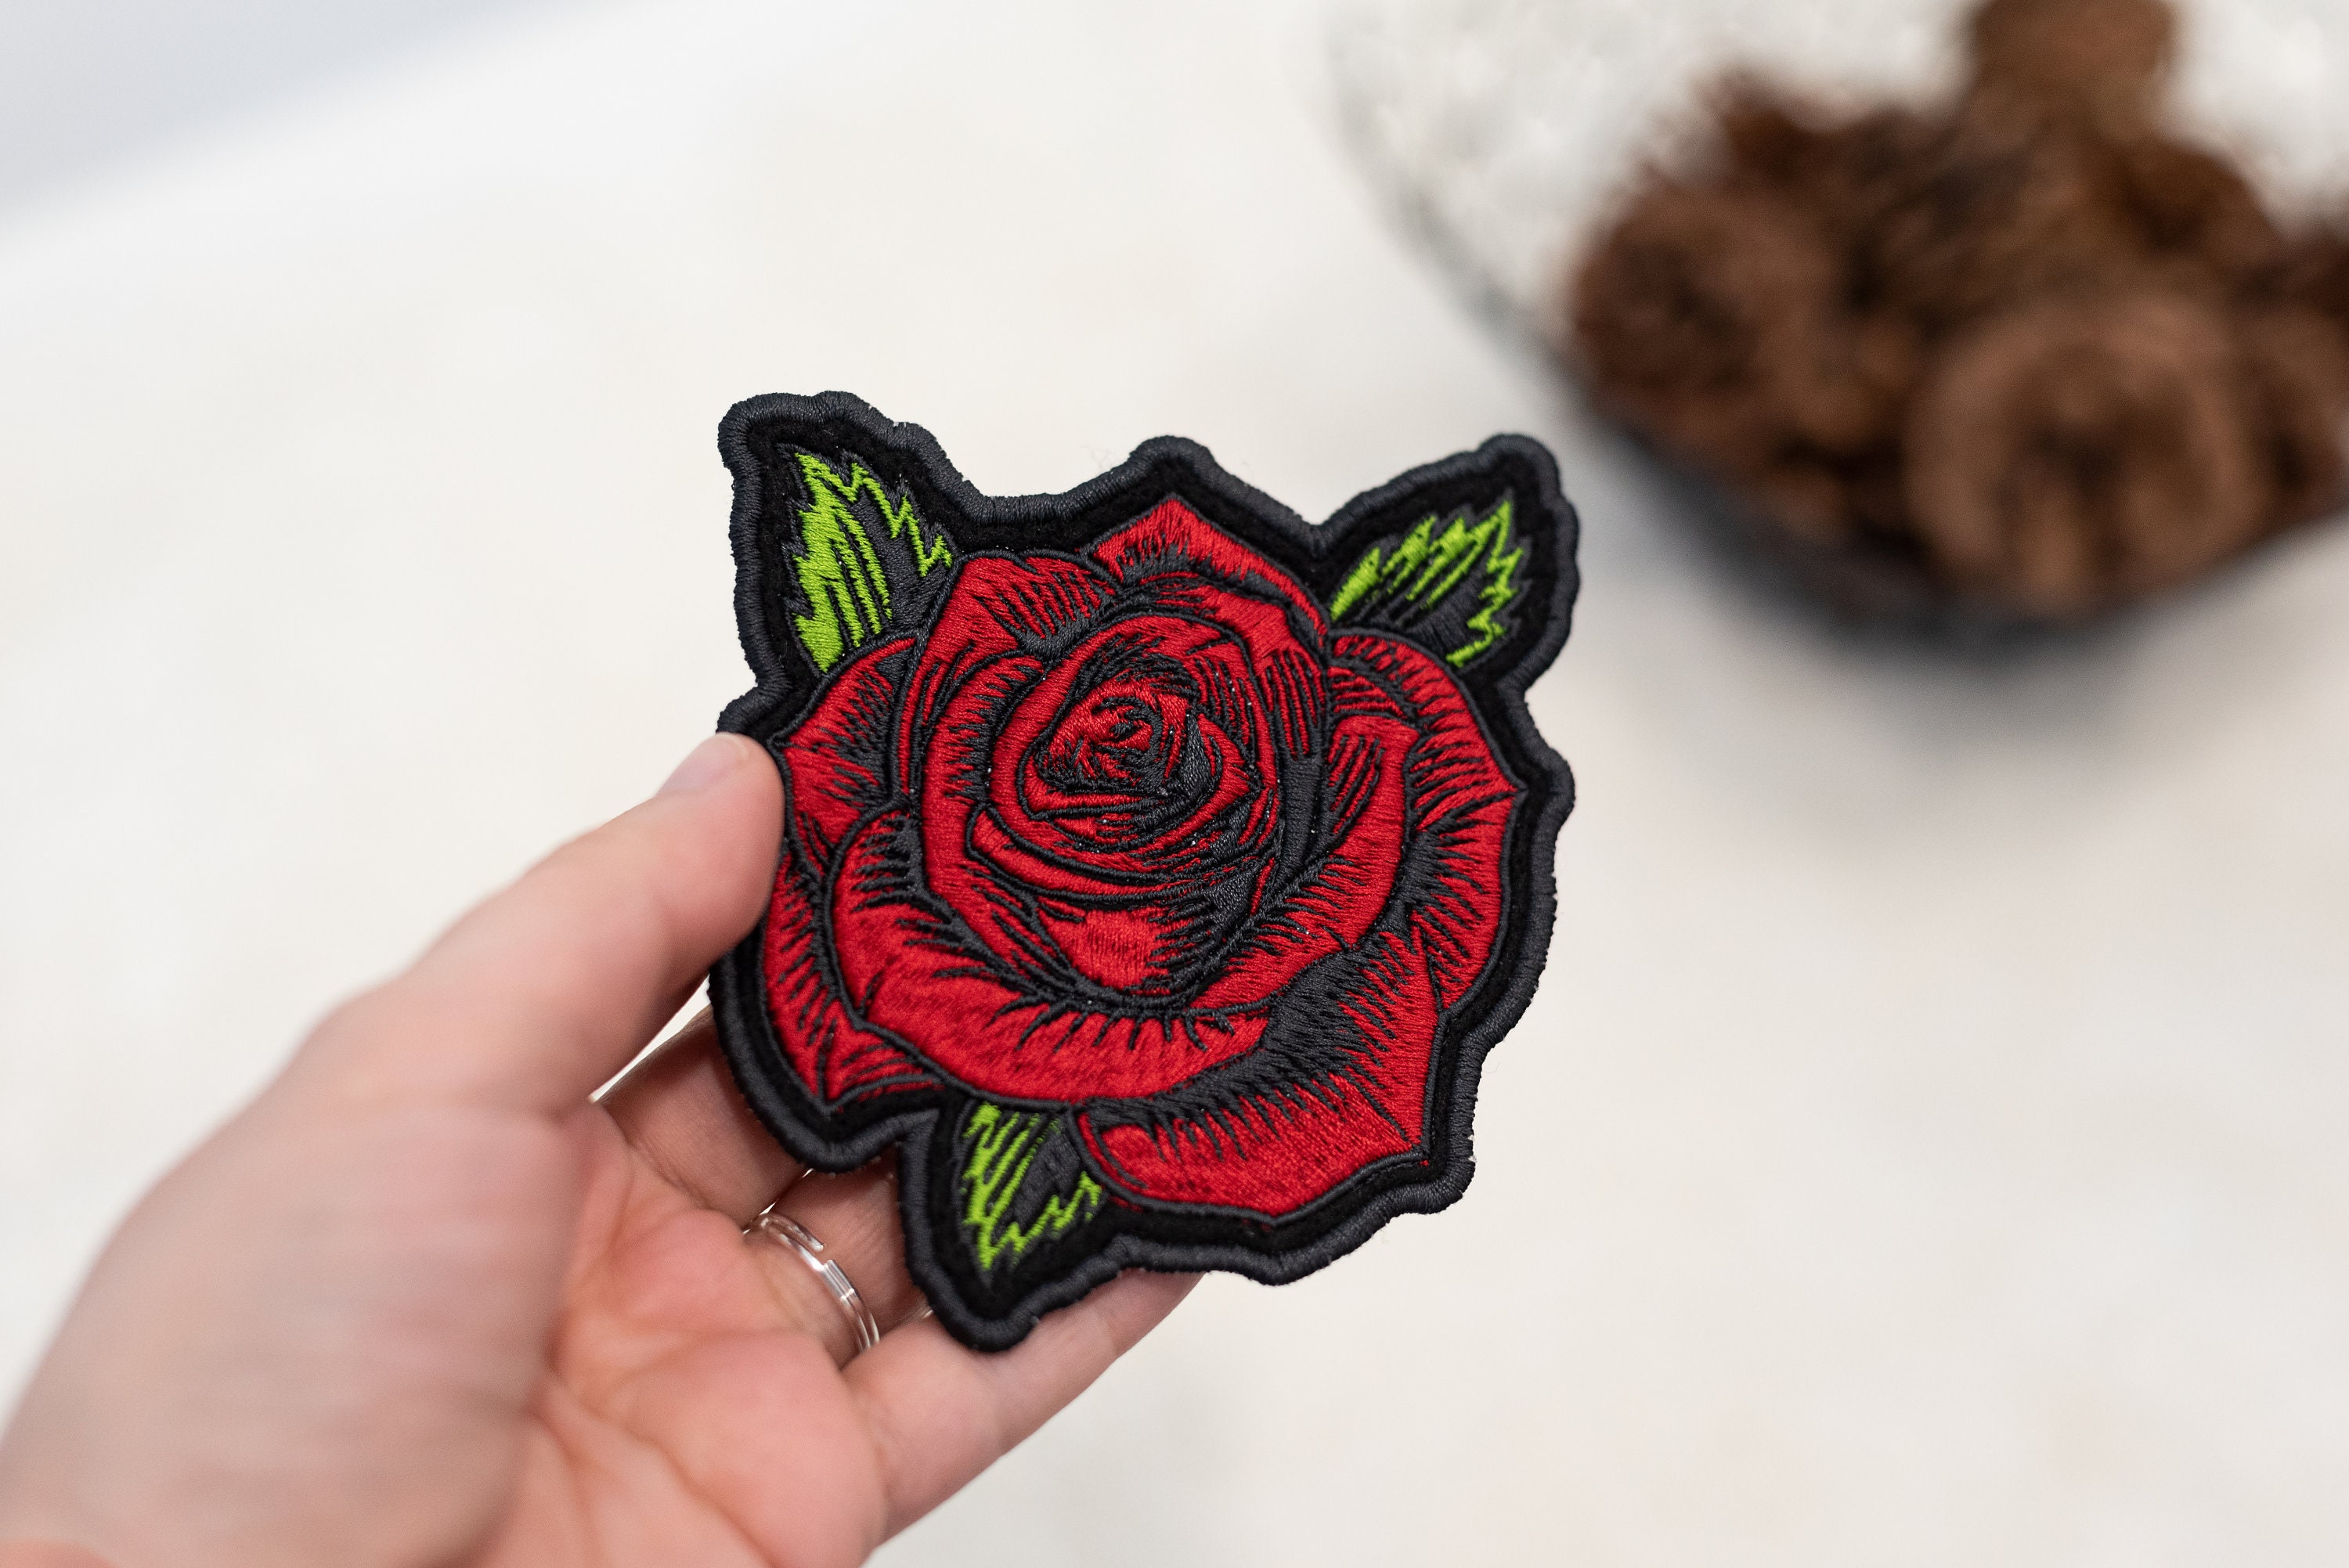  EXCEART 15pcs Black Rose Patch Rose Flowers Applique Knee  Patches for Pants Rose Iron on Patches Backpack Patch Sewing Patches Knee  Patches for Jeans Sewing Tools Self Made Twill Fabric 